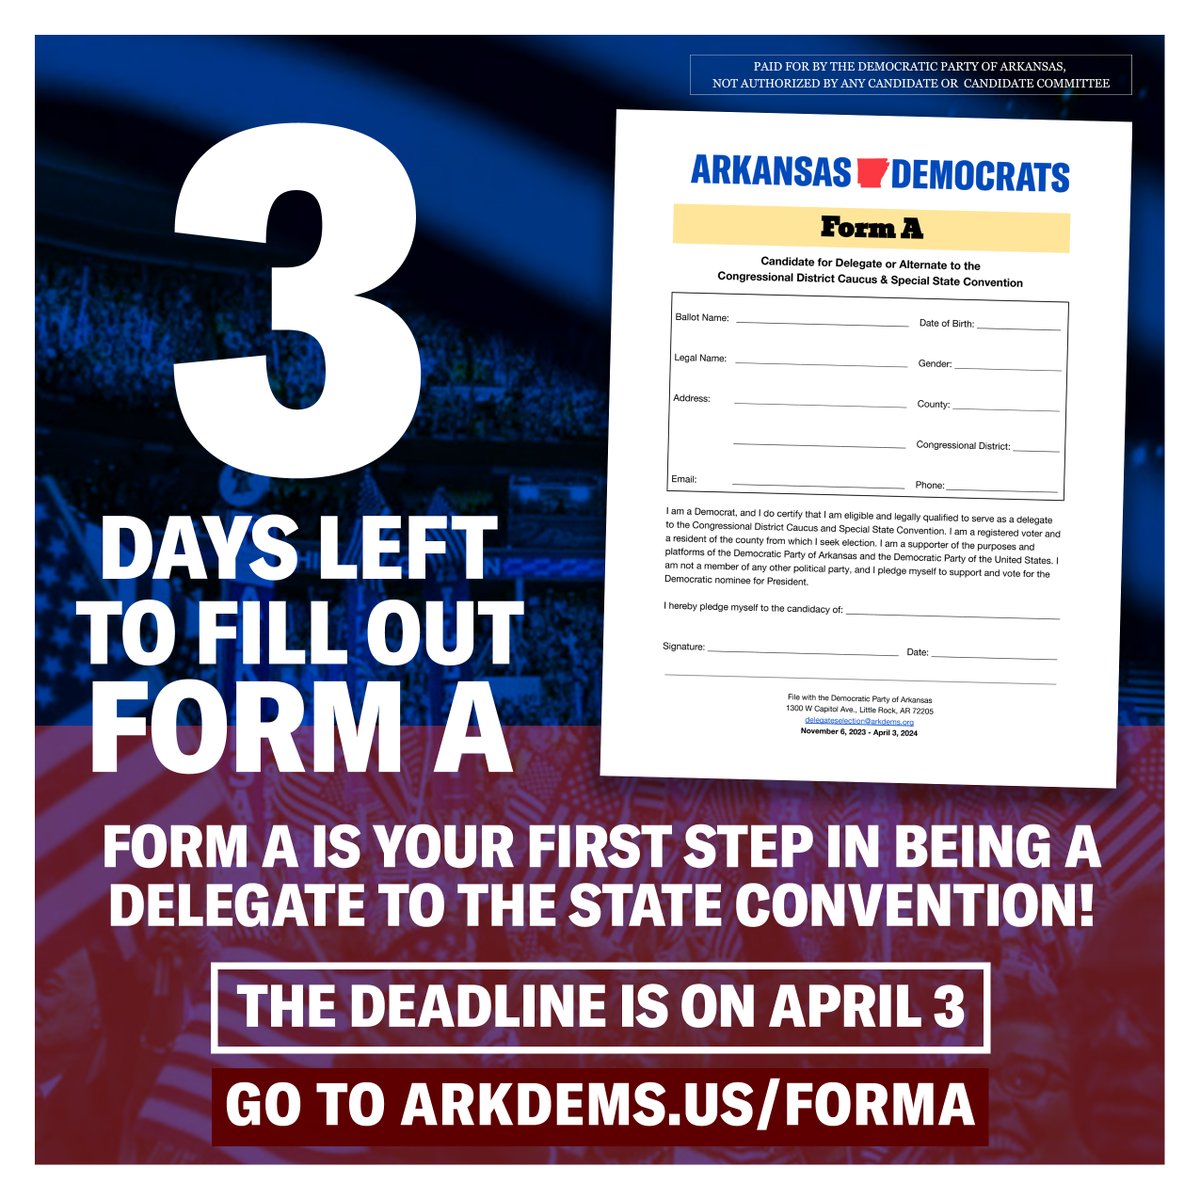 ⏰ LAST CHANCE ⏰ 3 DAYS LEFT Arkansas Democrats! The deadline to fill out Form A is rapidly approaching. Make sure your name is included on the list of supporters rallying at the Special State Convention! Don't wait any longer – fill out Form A now: arkdems.us/FormA